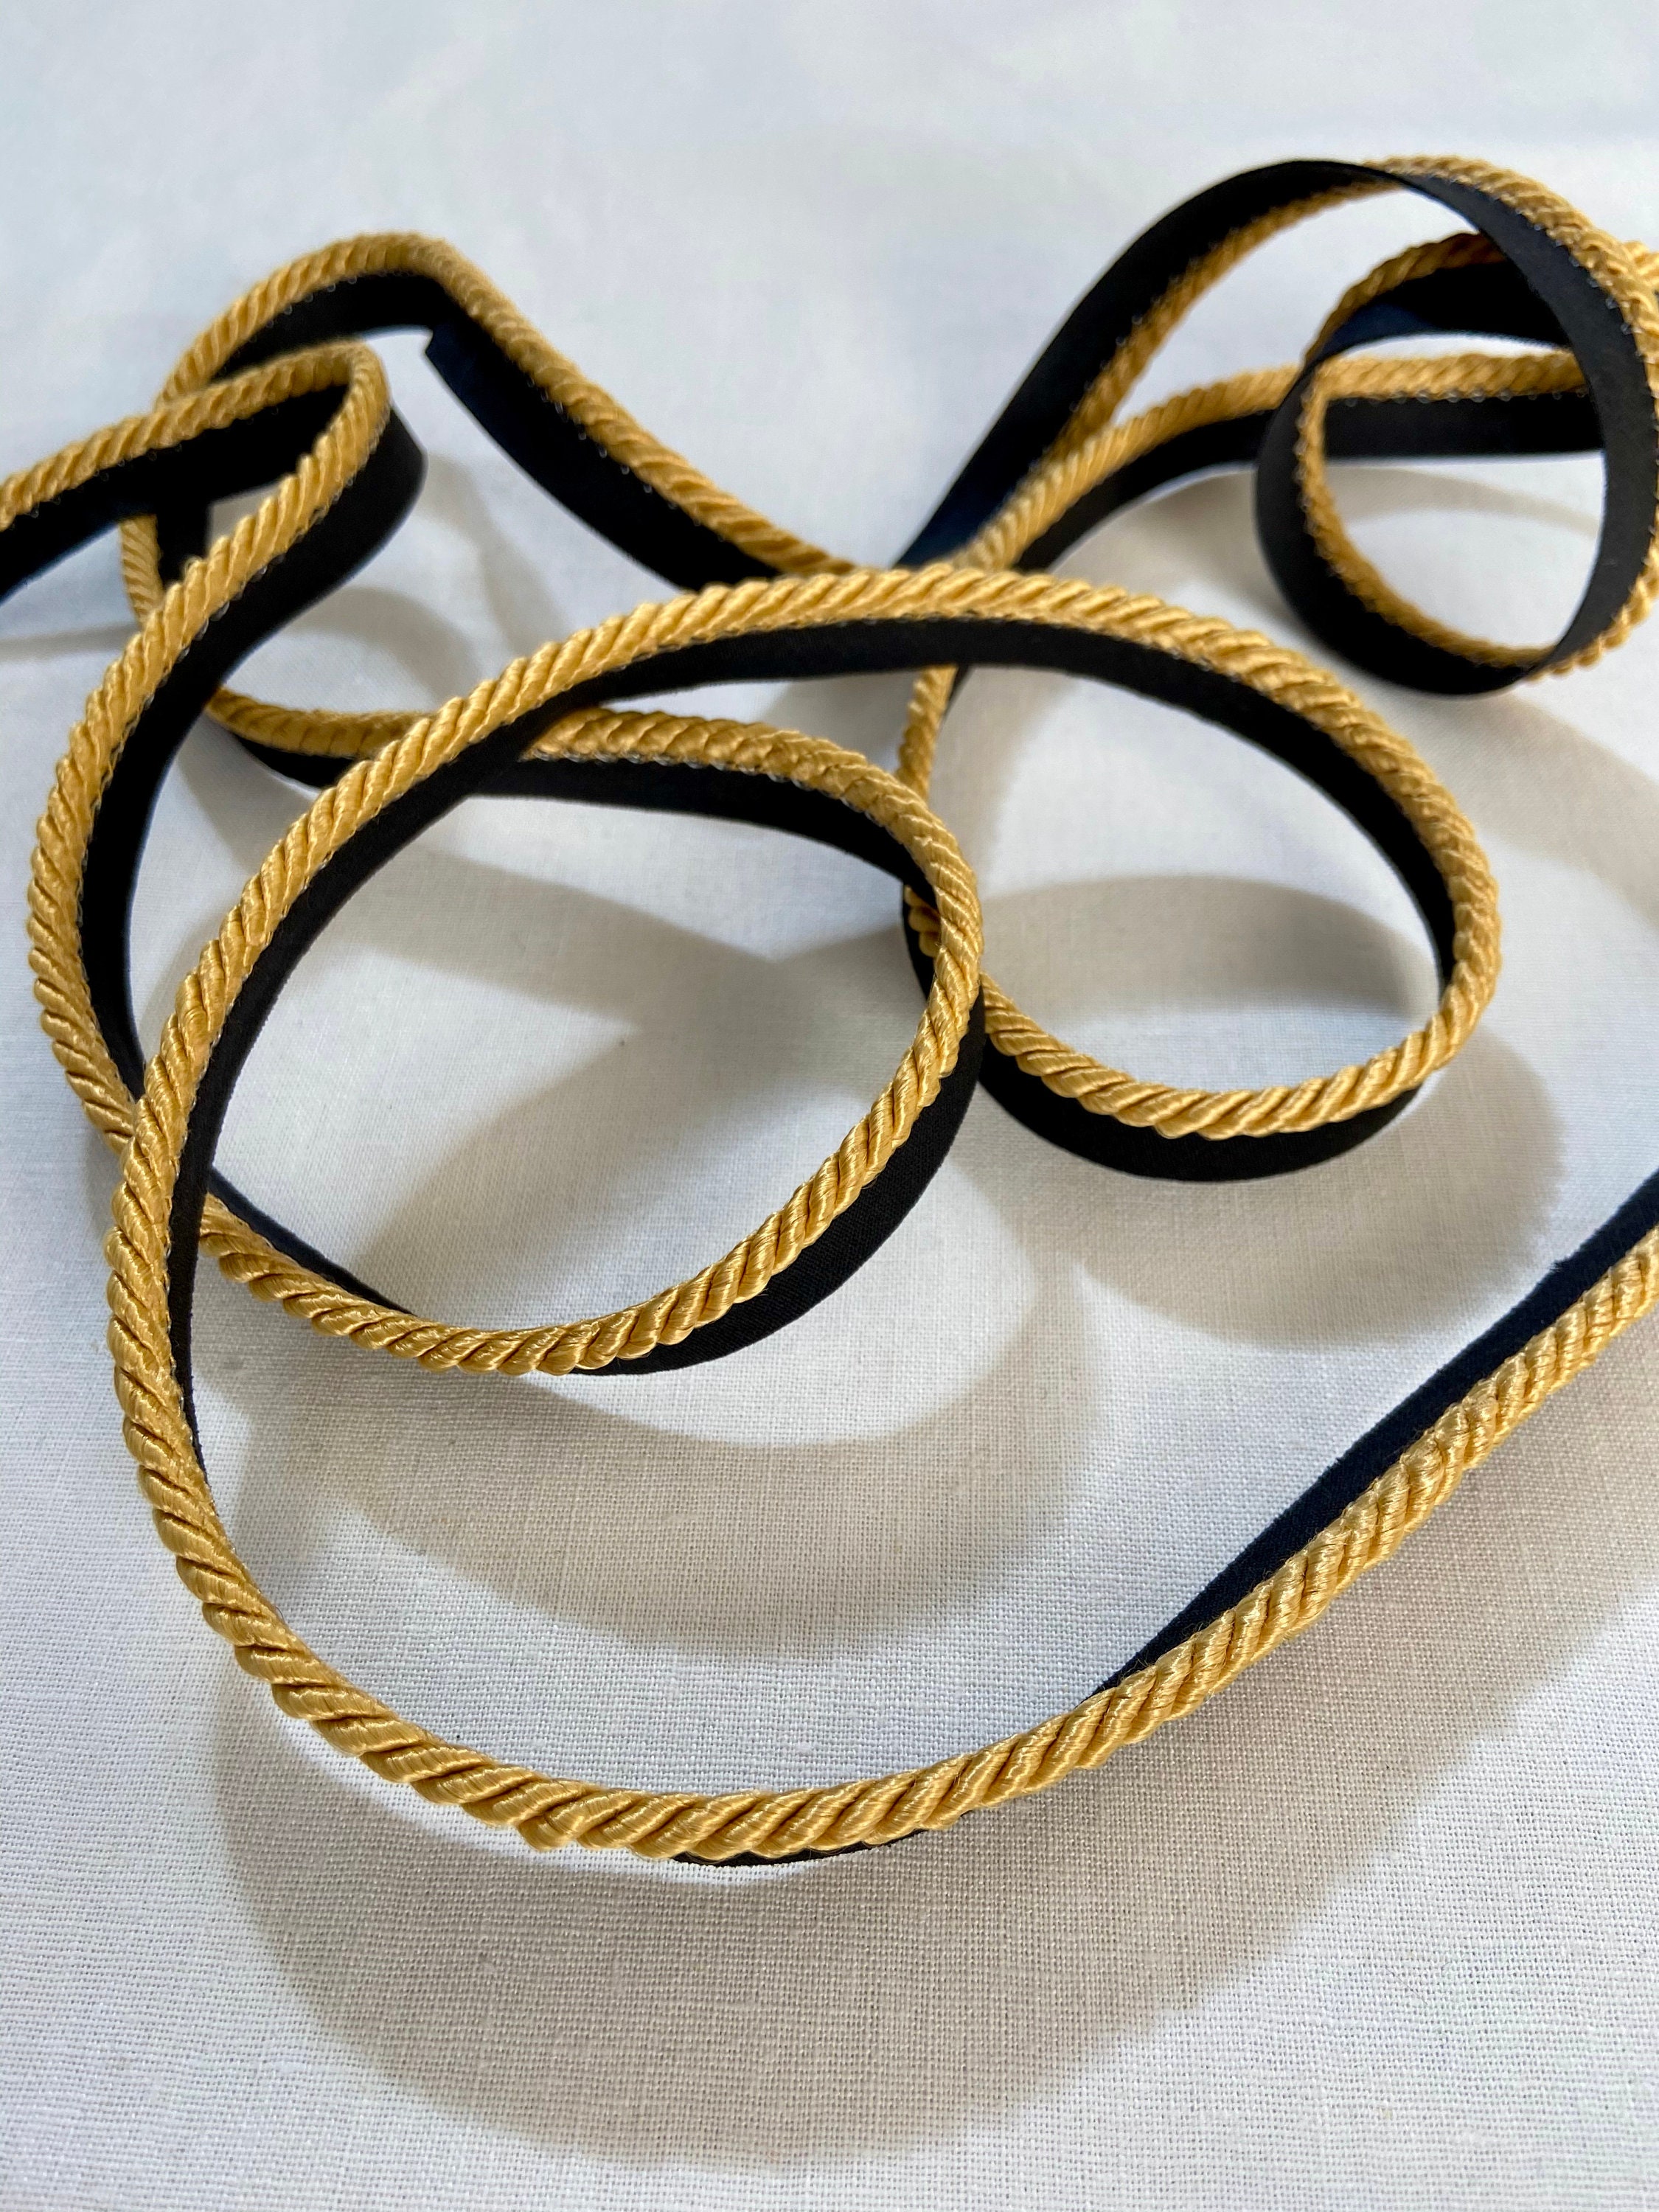 Satin Gold Cord Trim With Lip Twisted Rope Design for Edge Work on Pillows,  Bedding, Drapes, Home Decor, Upholstery - Etsy